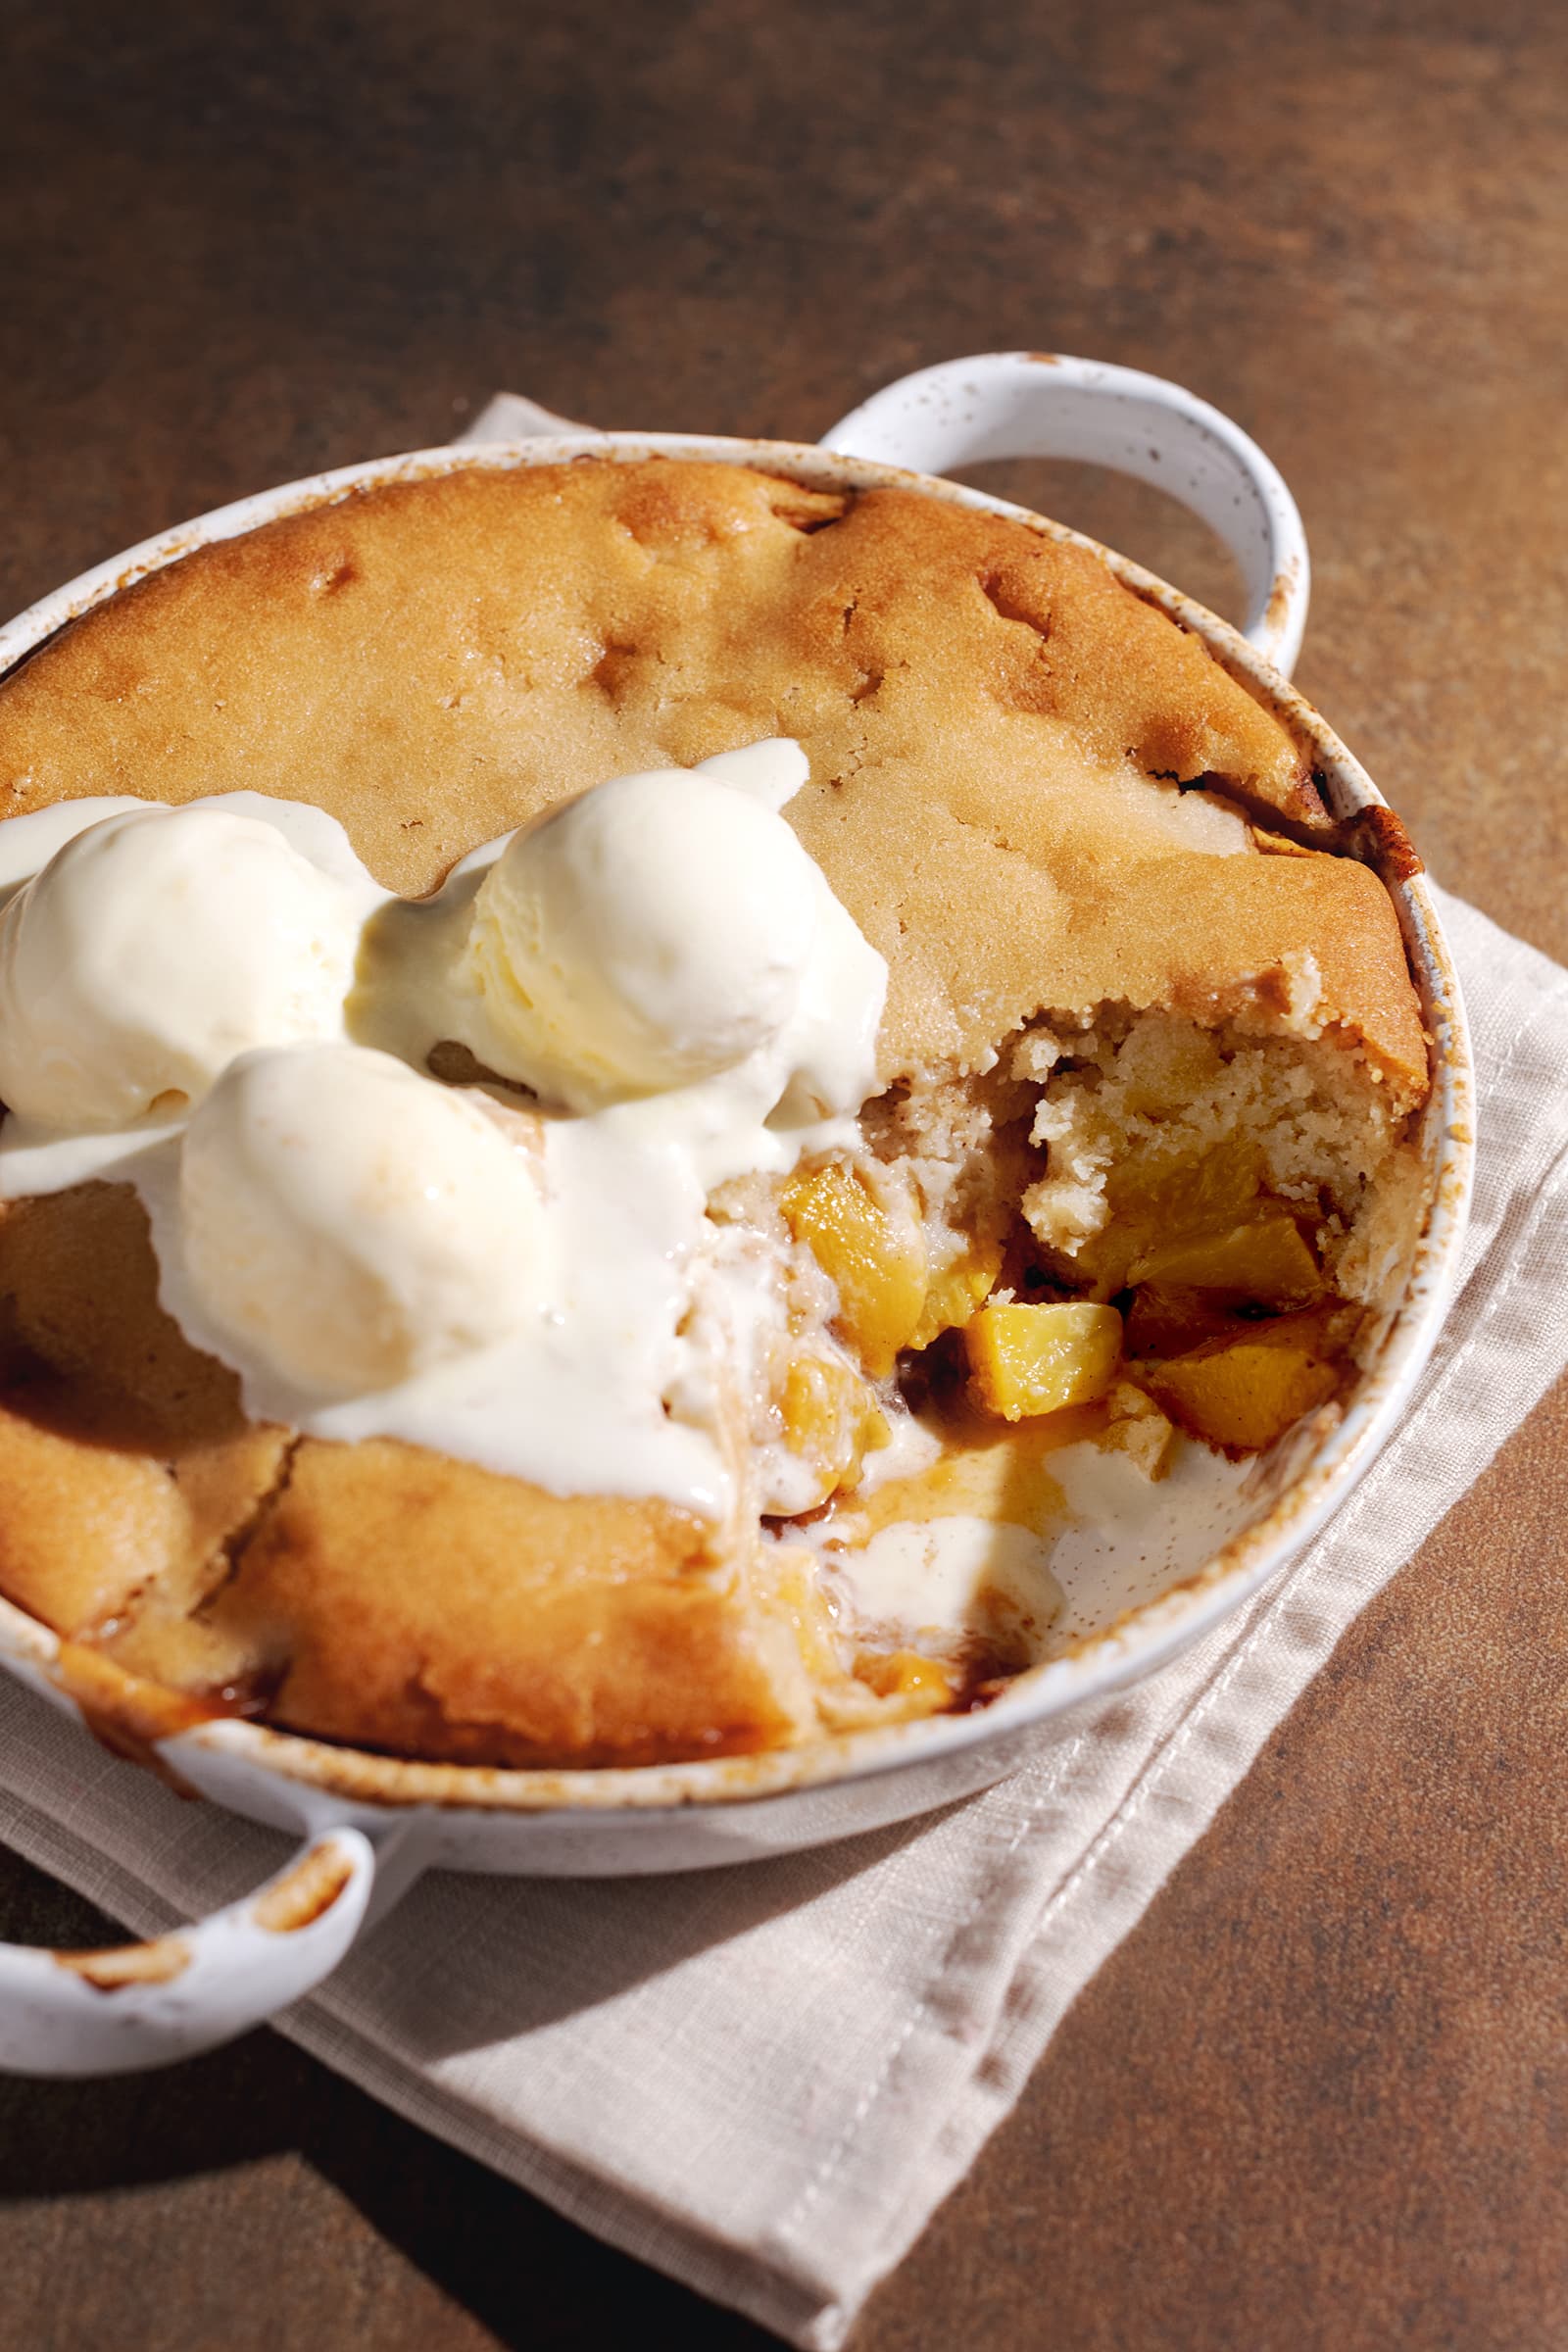 A dish of peach cobbler with a scoop taken out of it to show the peach filling inside.